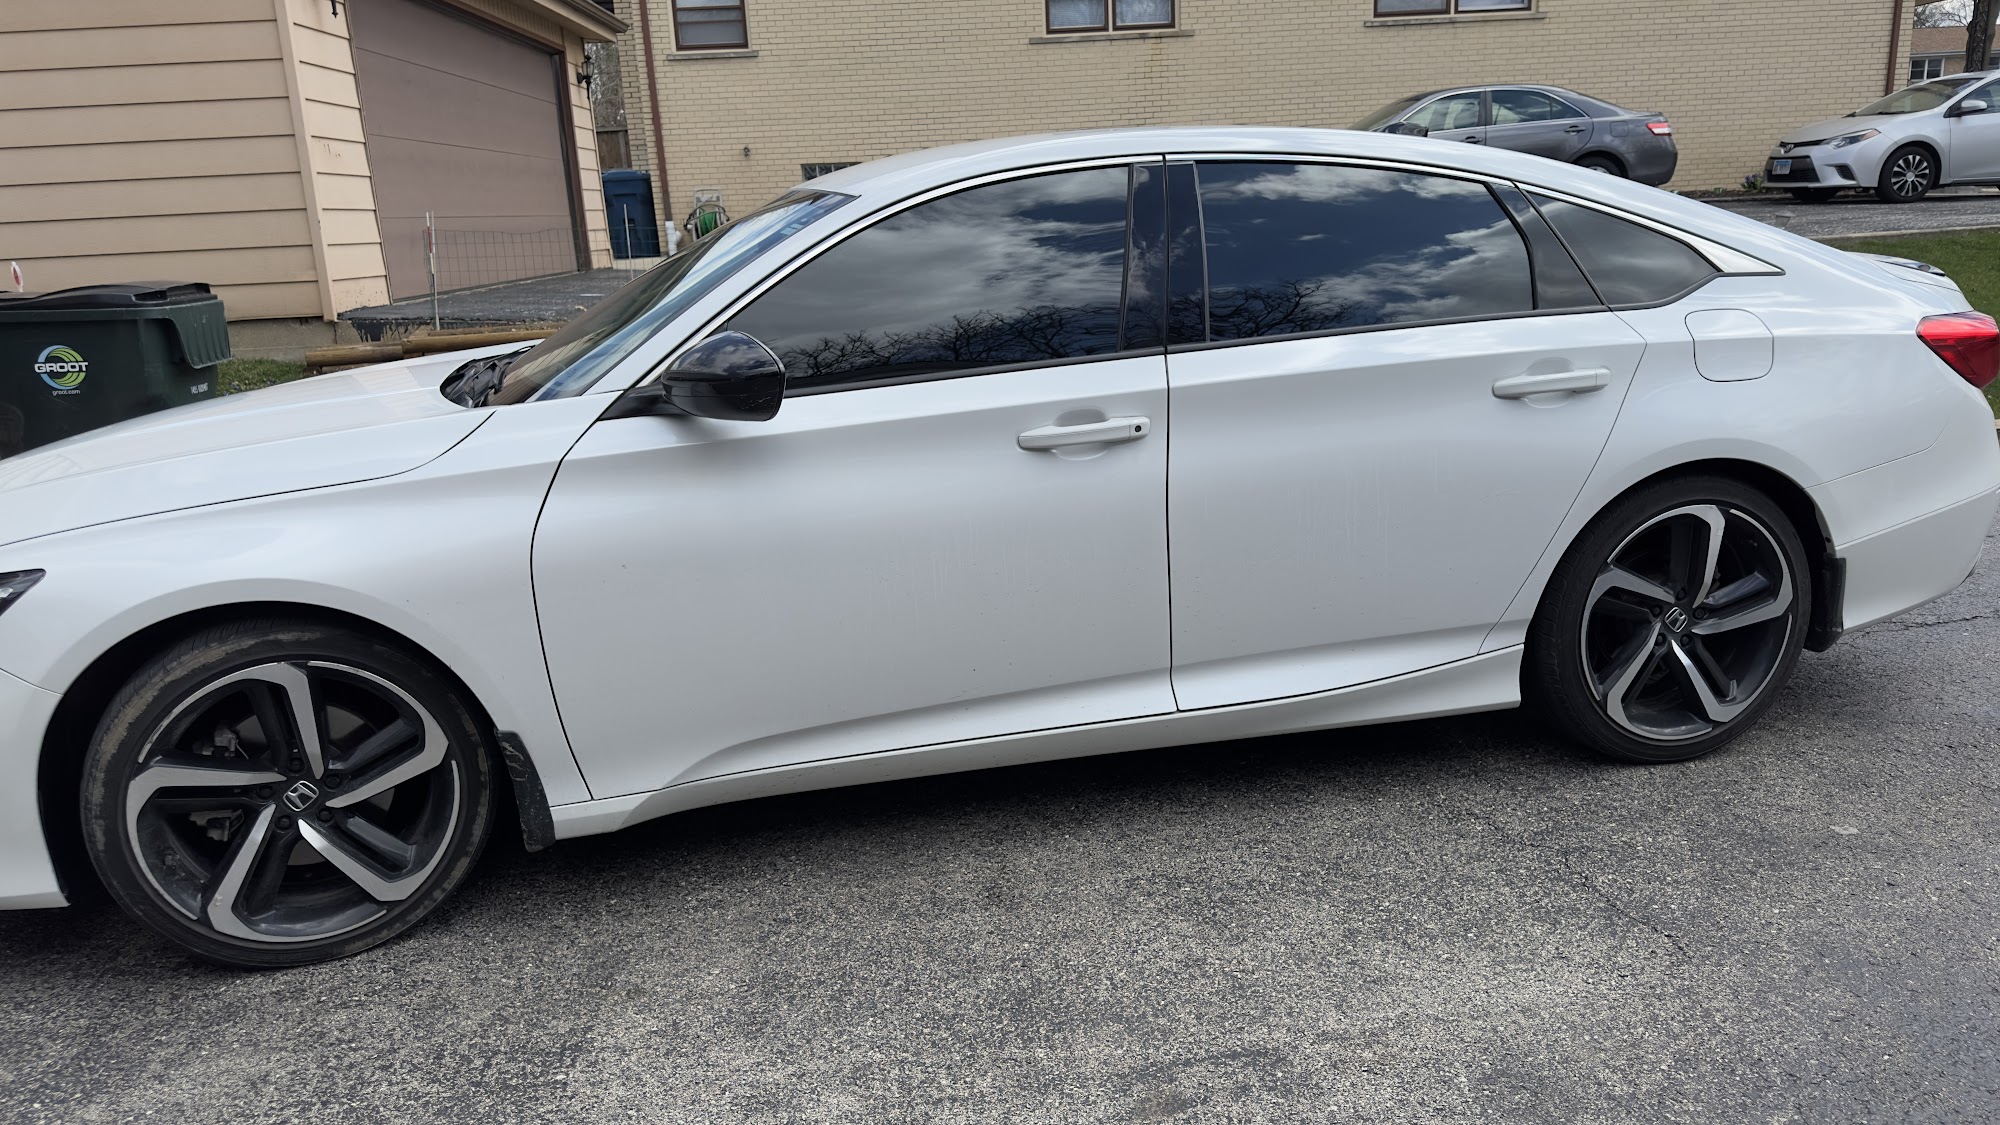 ROMEO’S Window Tinting / DuPage county 770 56th Pl, Clarendon Hills Illinois 60514